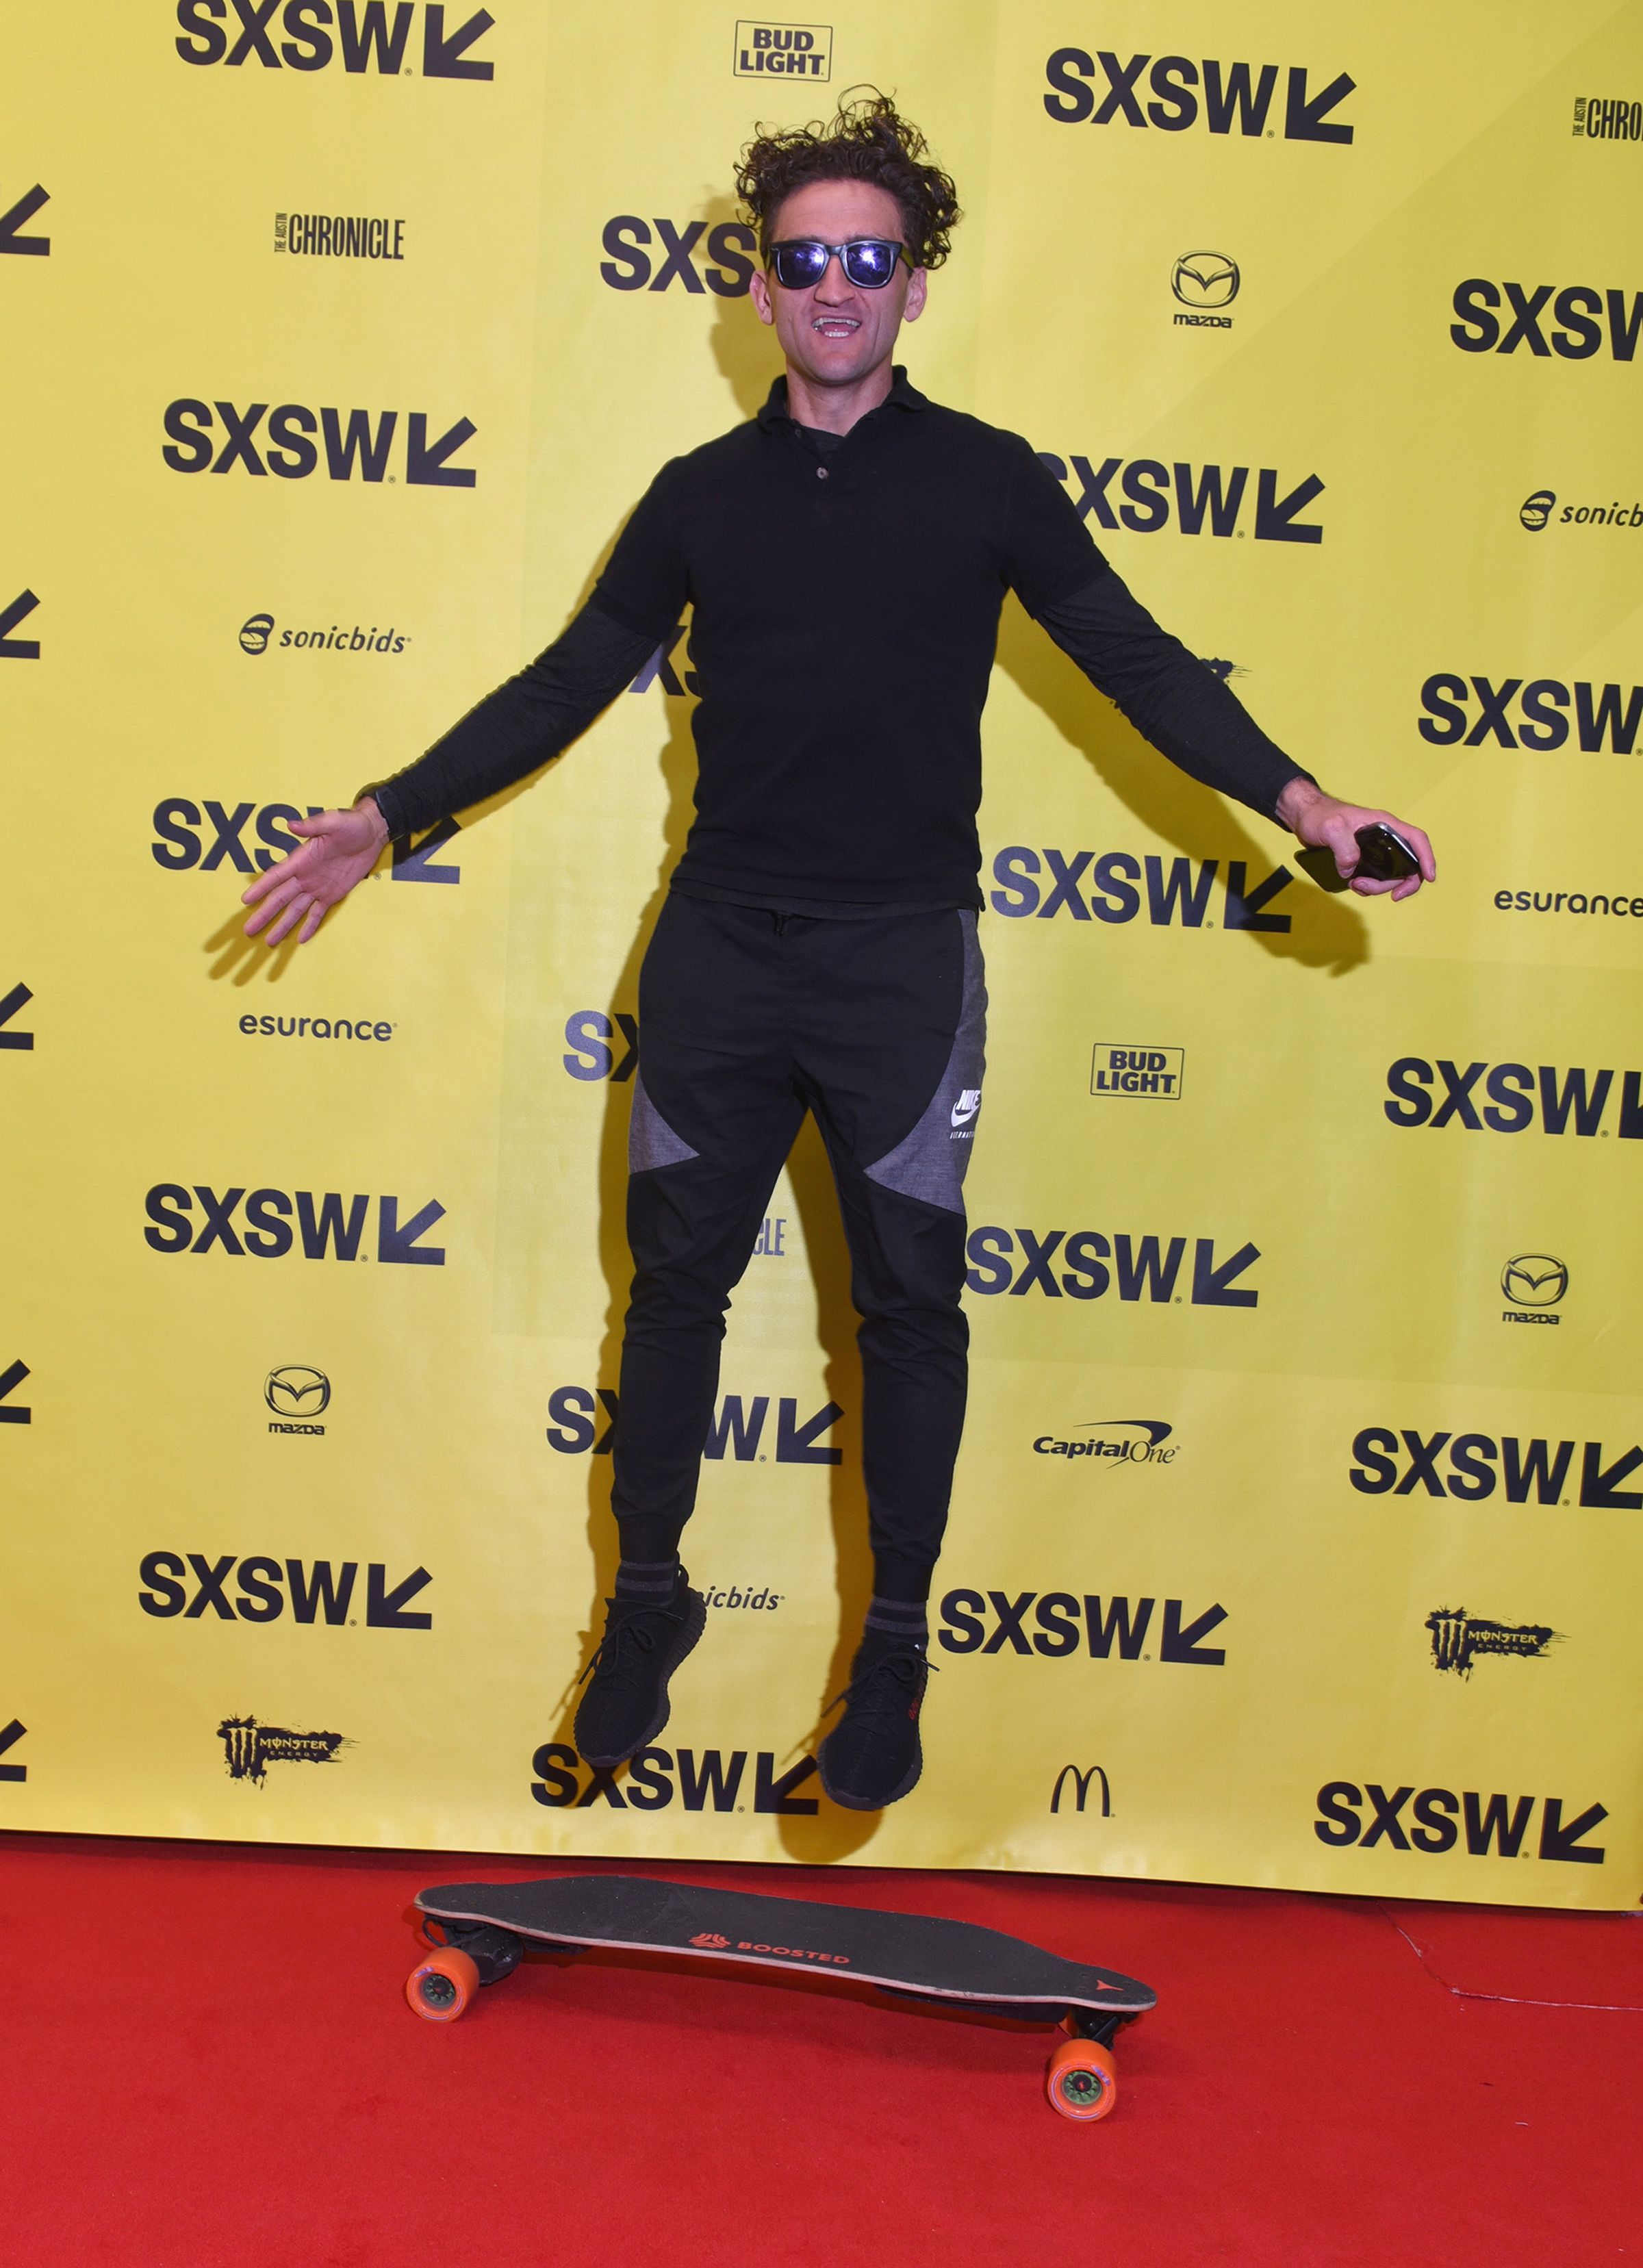 Casey Neistat attends “From YouTube Star to Media Company Co-founder” at Austin Convention Center on March 11th, 2017, in Austin, Texas. 